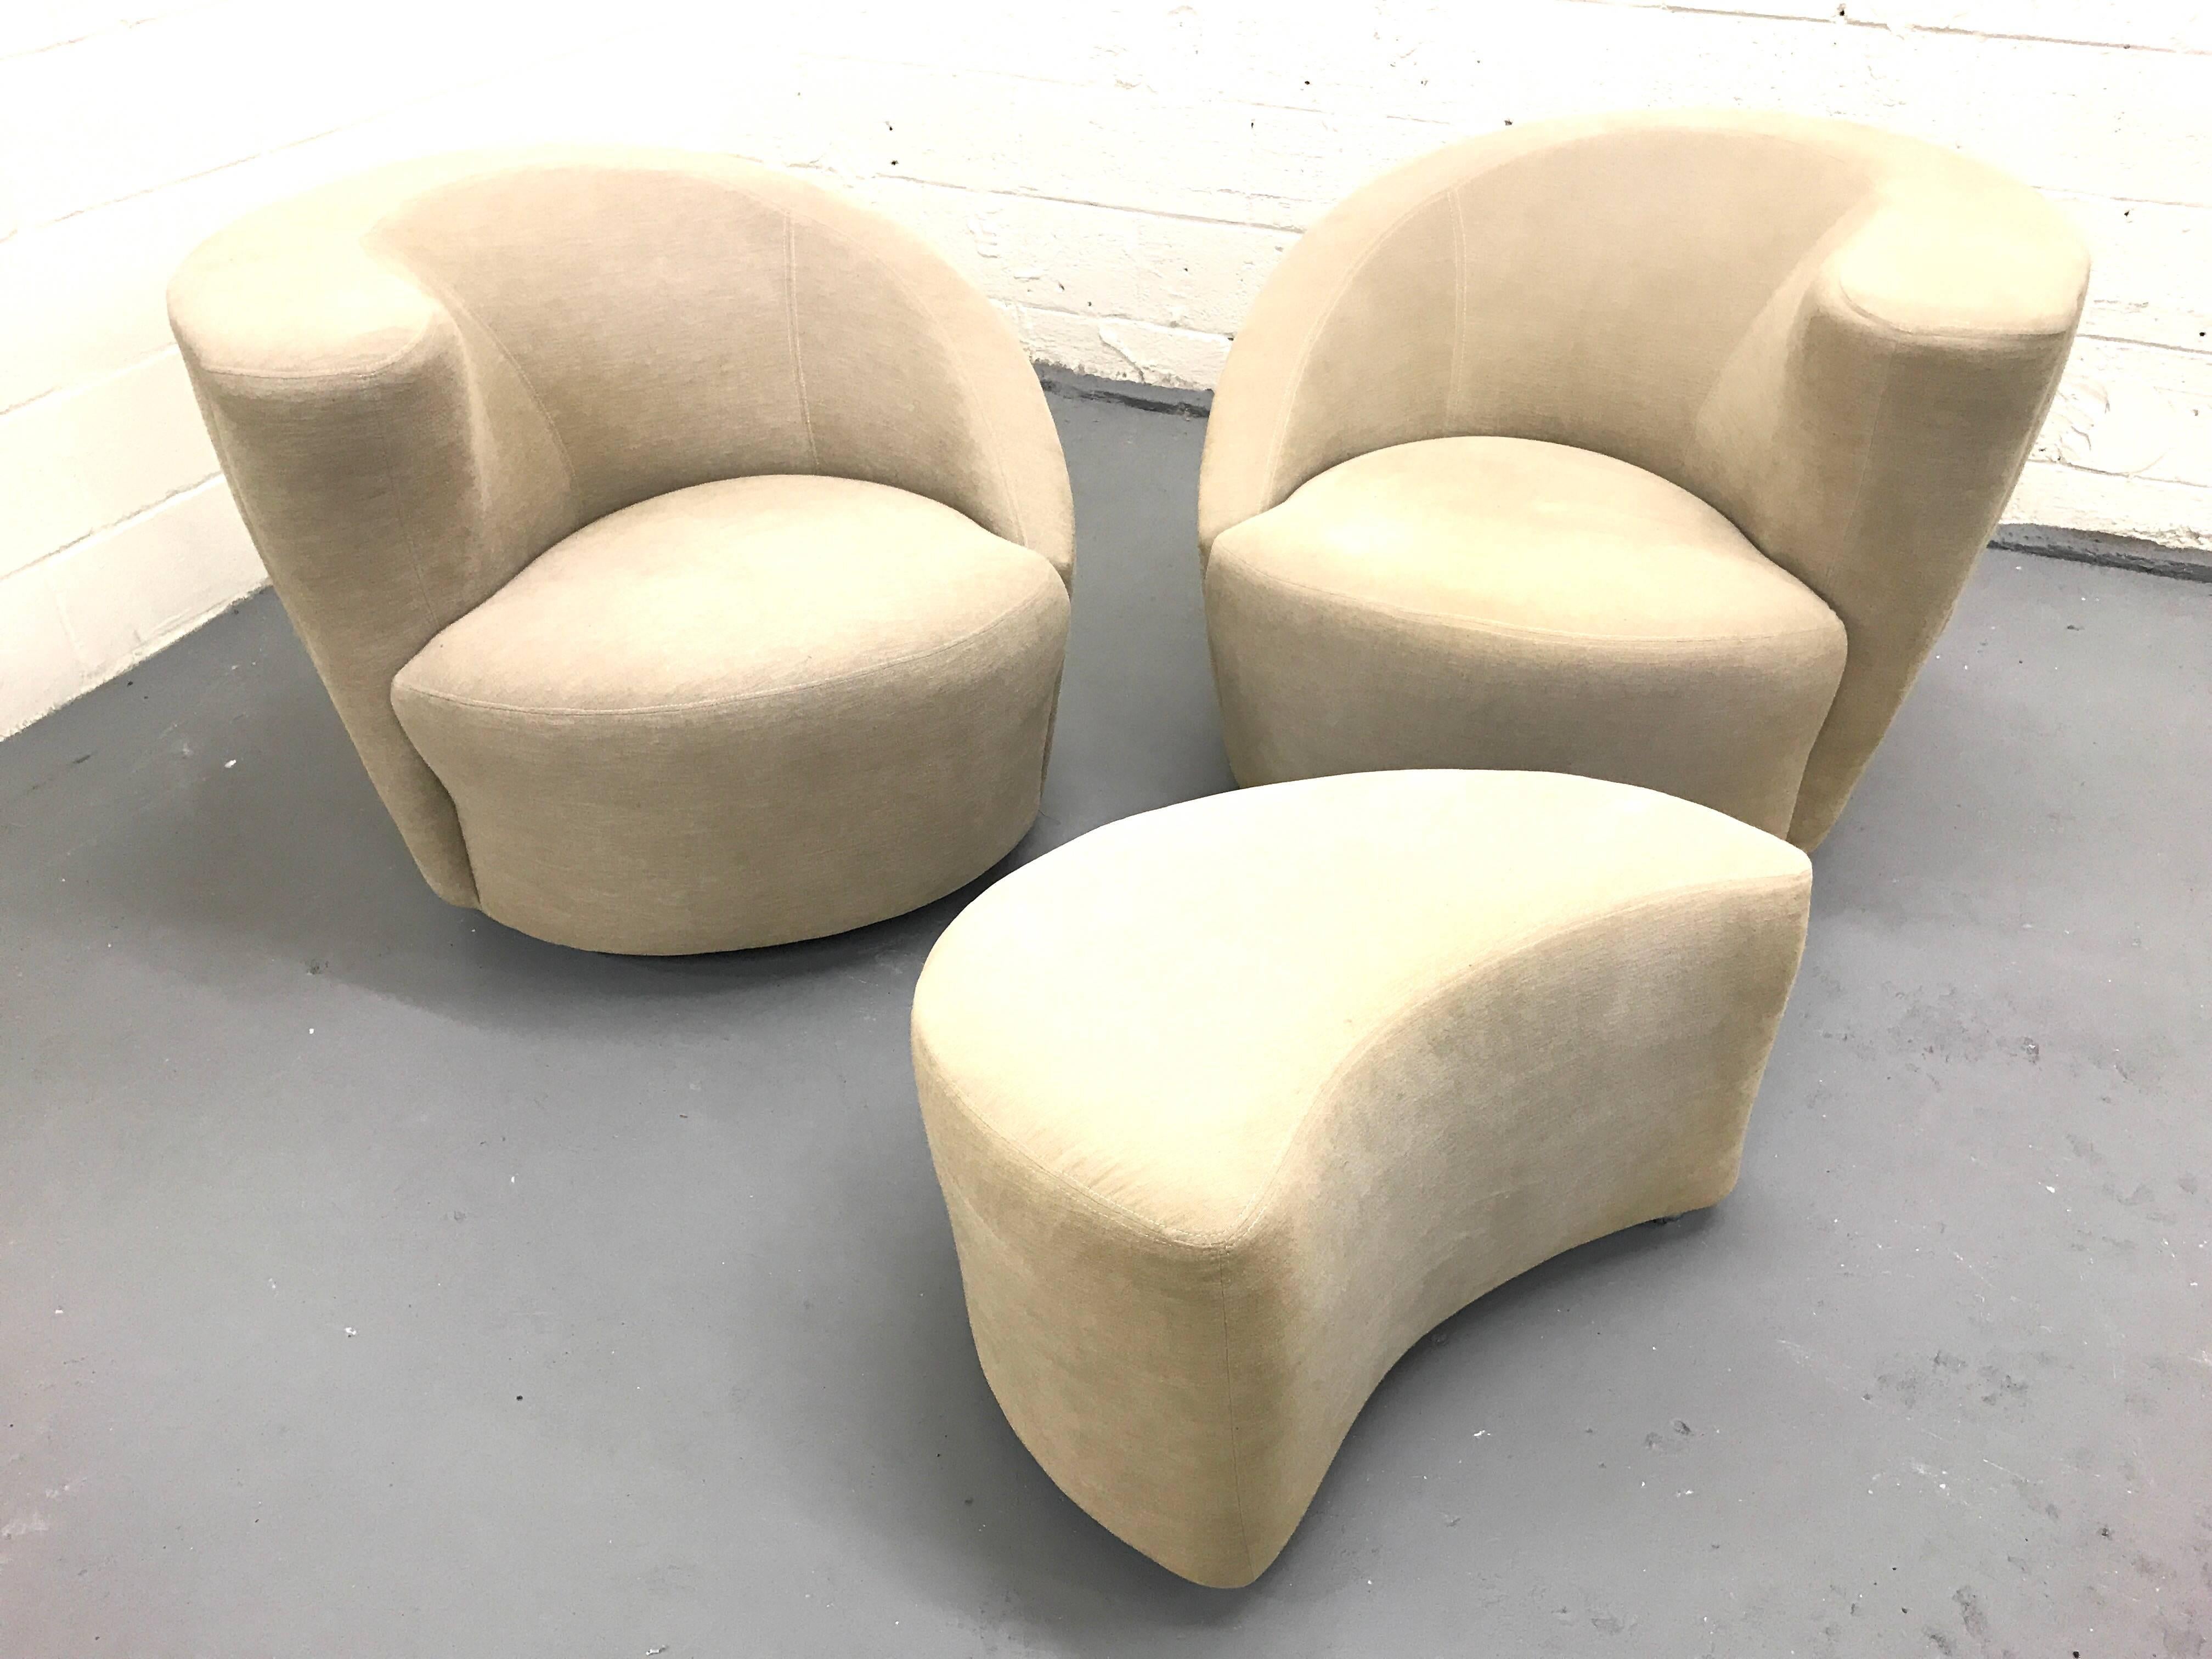 Pair of swivel Nautilus lounge chairs and ottoman by Vladimir Kagan, USA, 1990s

Dimensions of ottoman :
Width 29.50 inches
Depth 20 inches
Height 17 inches.